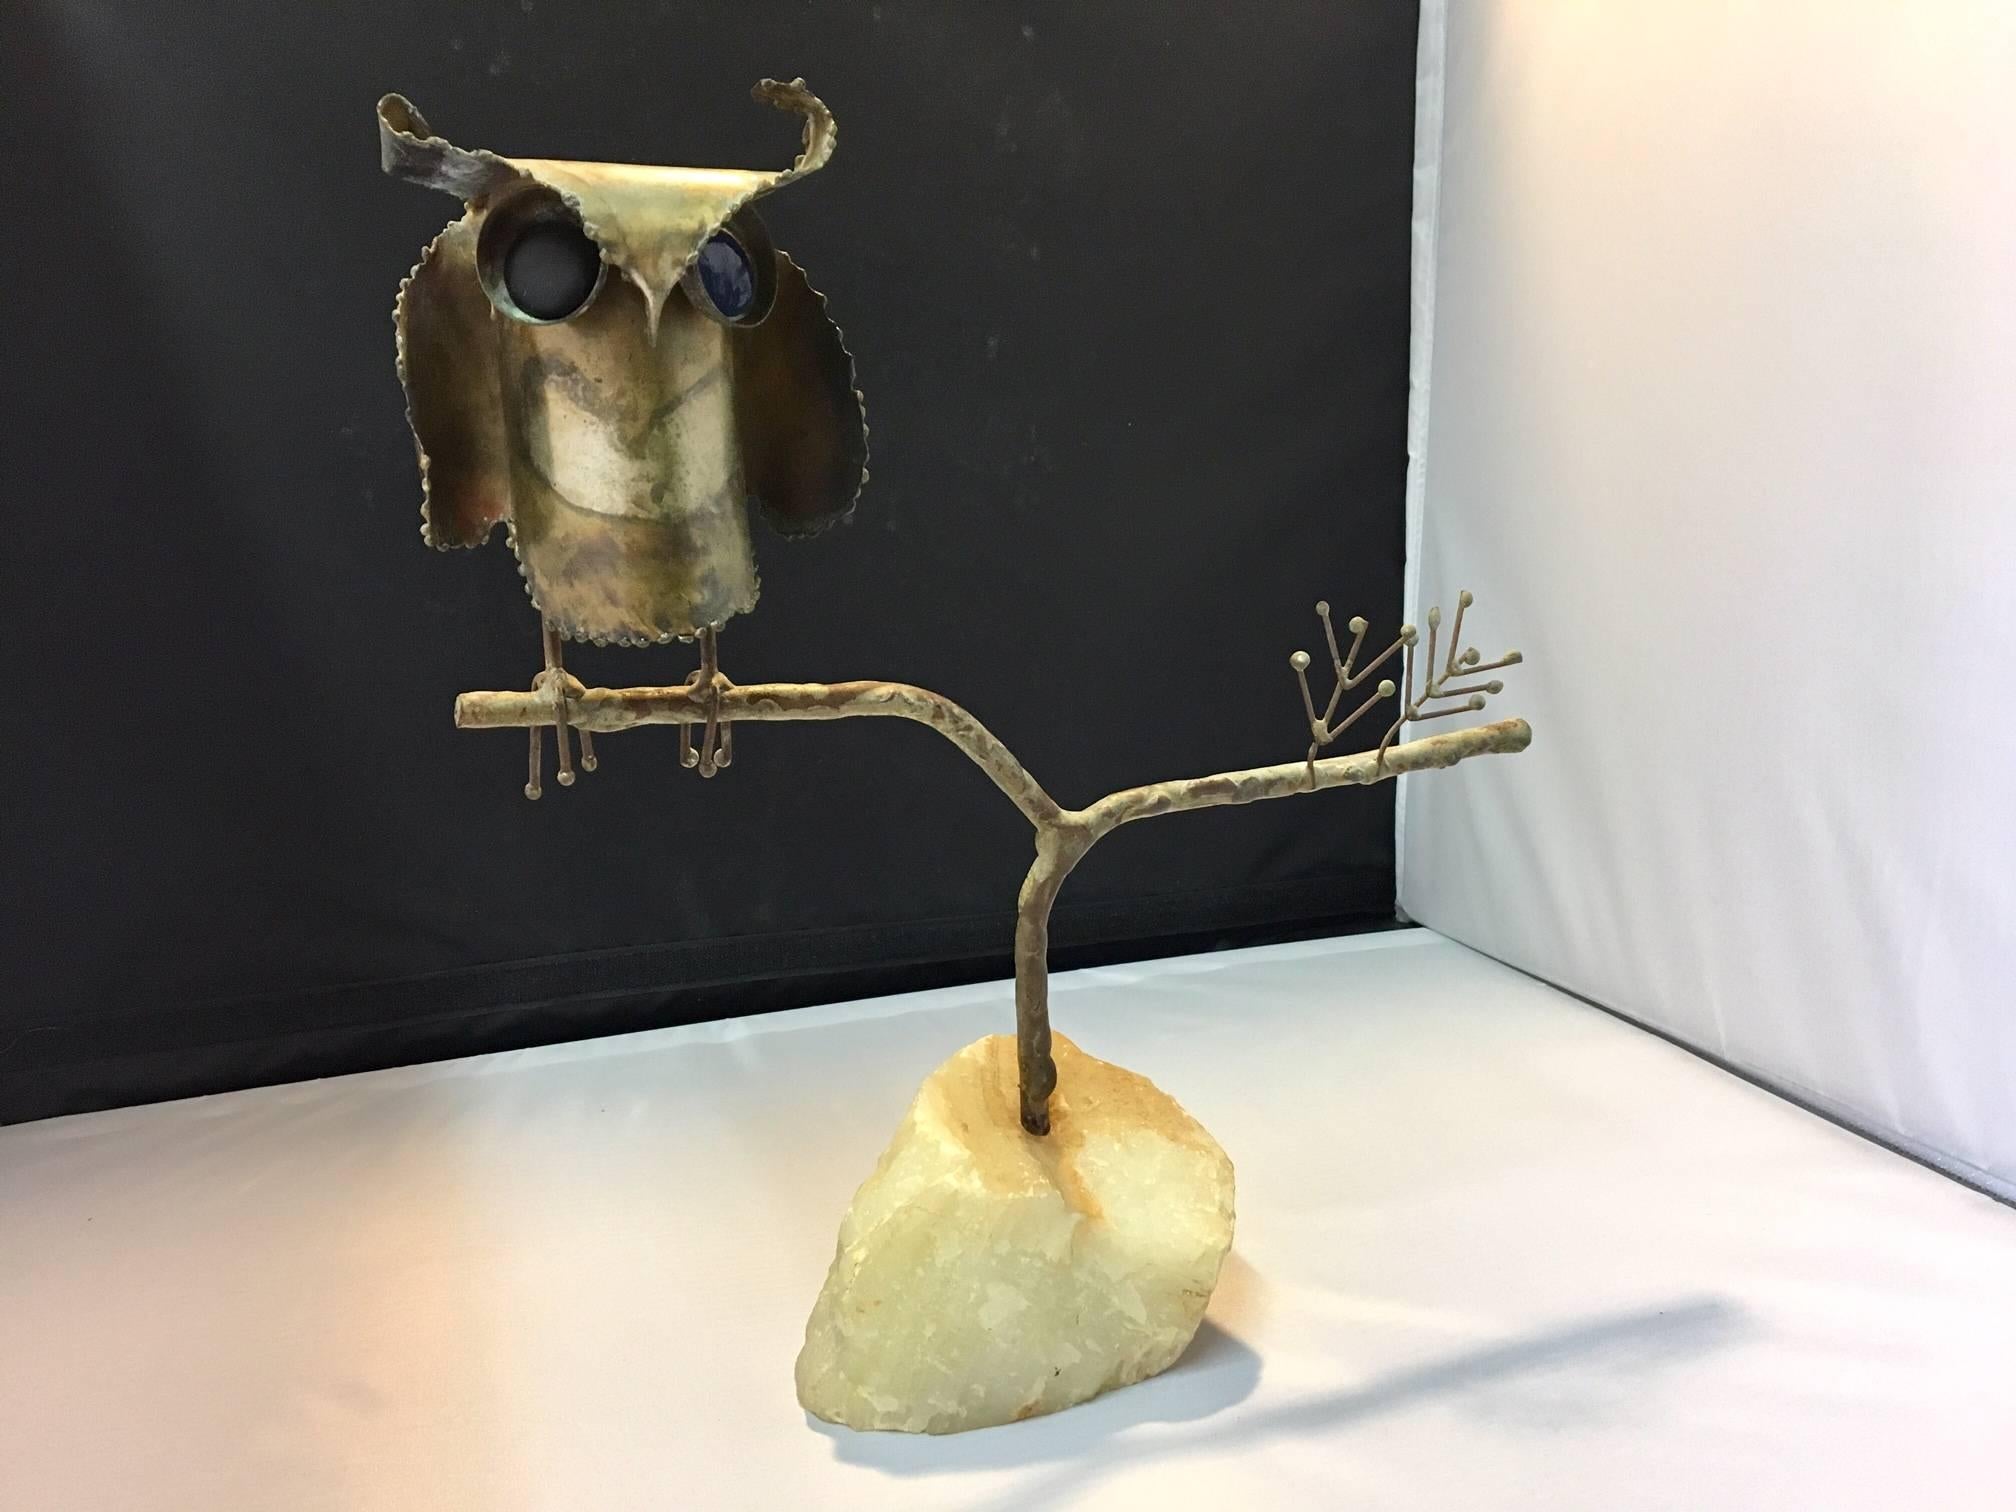 Whimsical table sculpture signed and dated by Curtis Jere. The owl is sitting on a marble base and has one black and one blue enamel eye. This is a very collectible item, signed C. Jere and dated 1968.